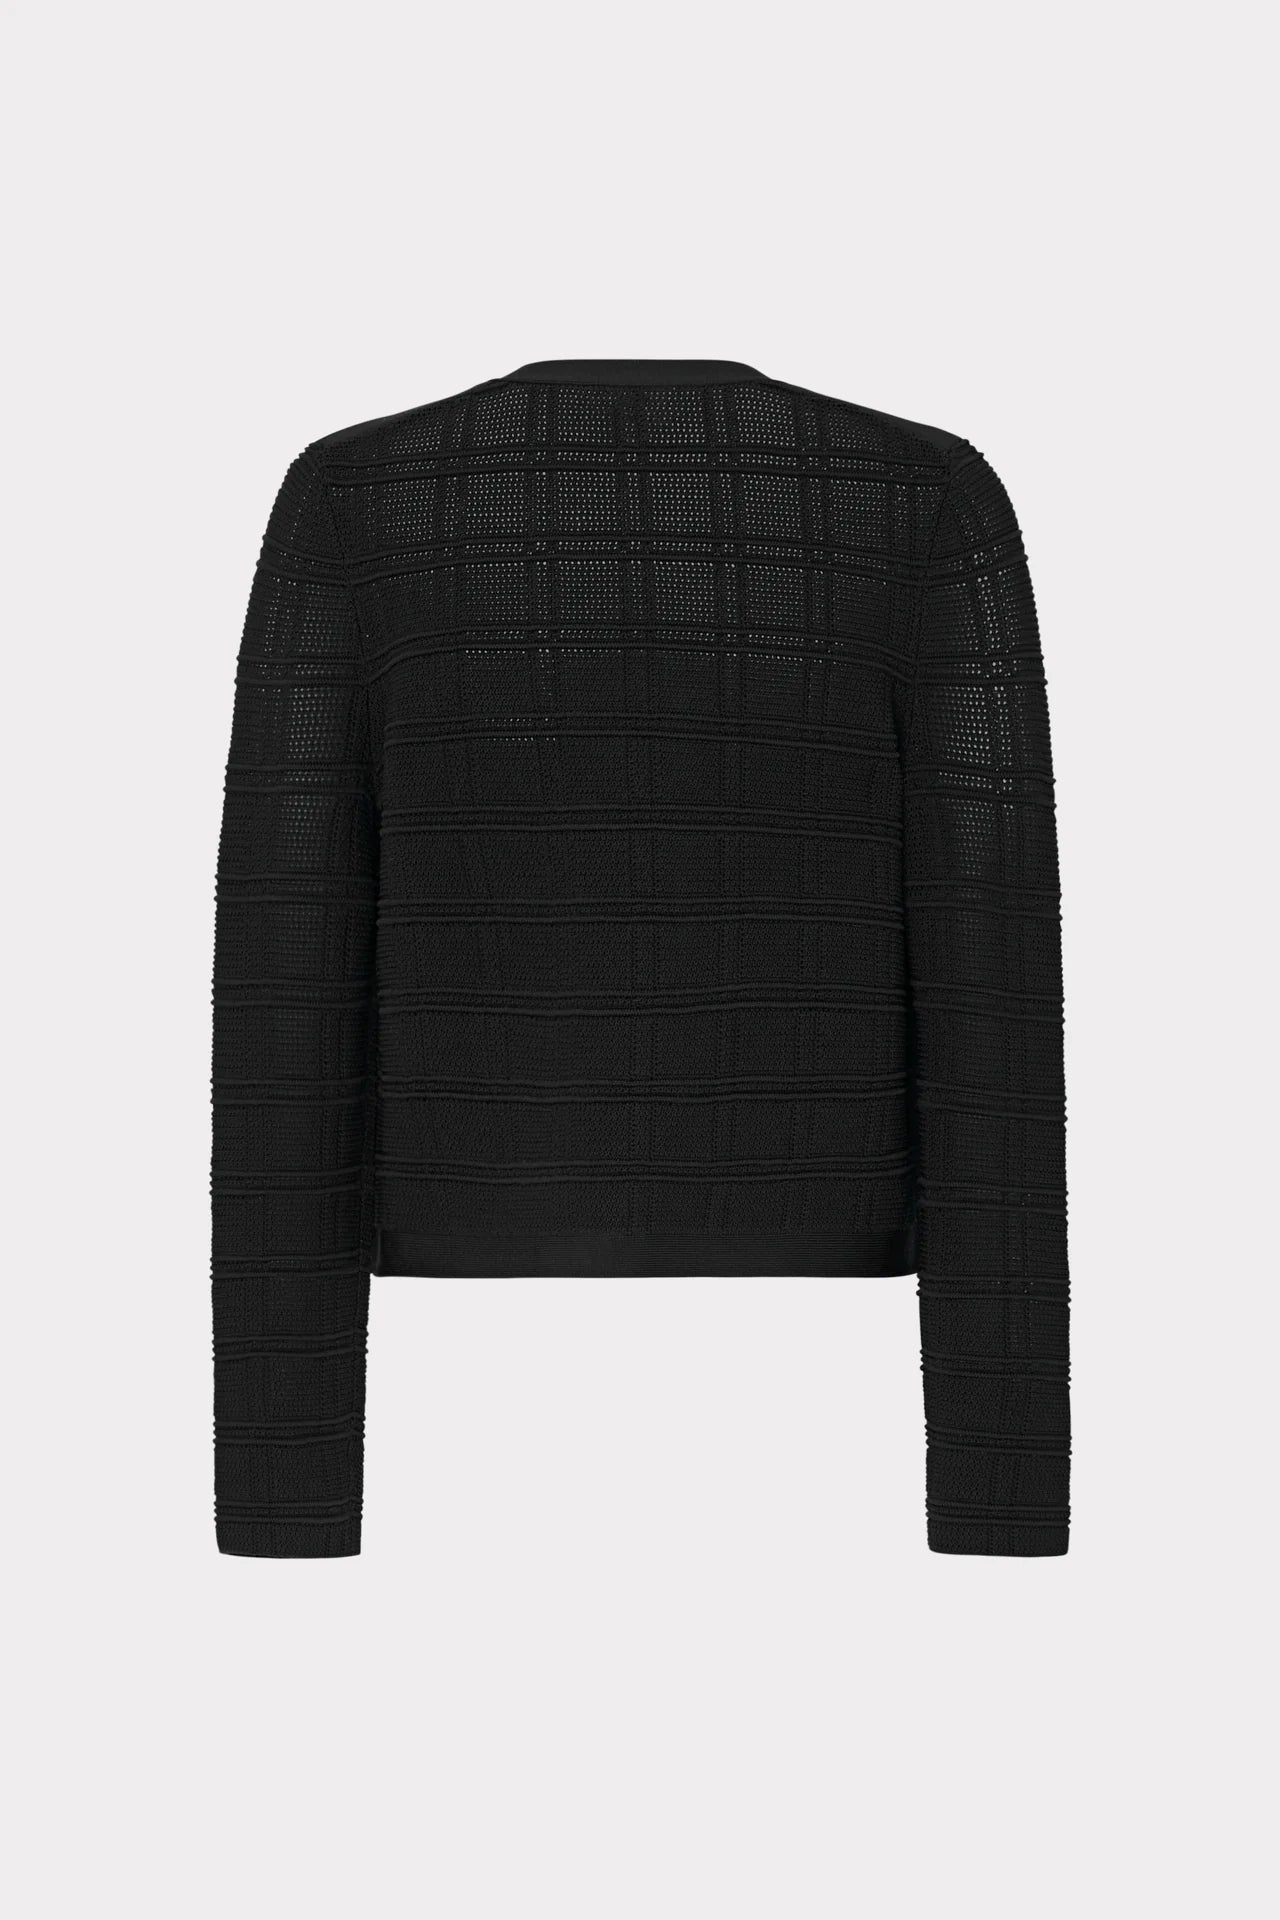 Pointelle Textured Knit Jacket Black - Milly